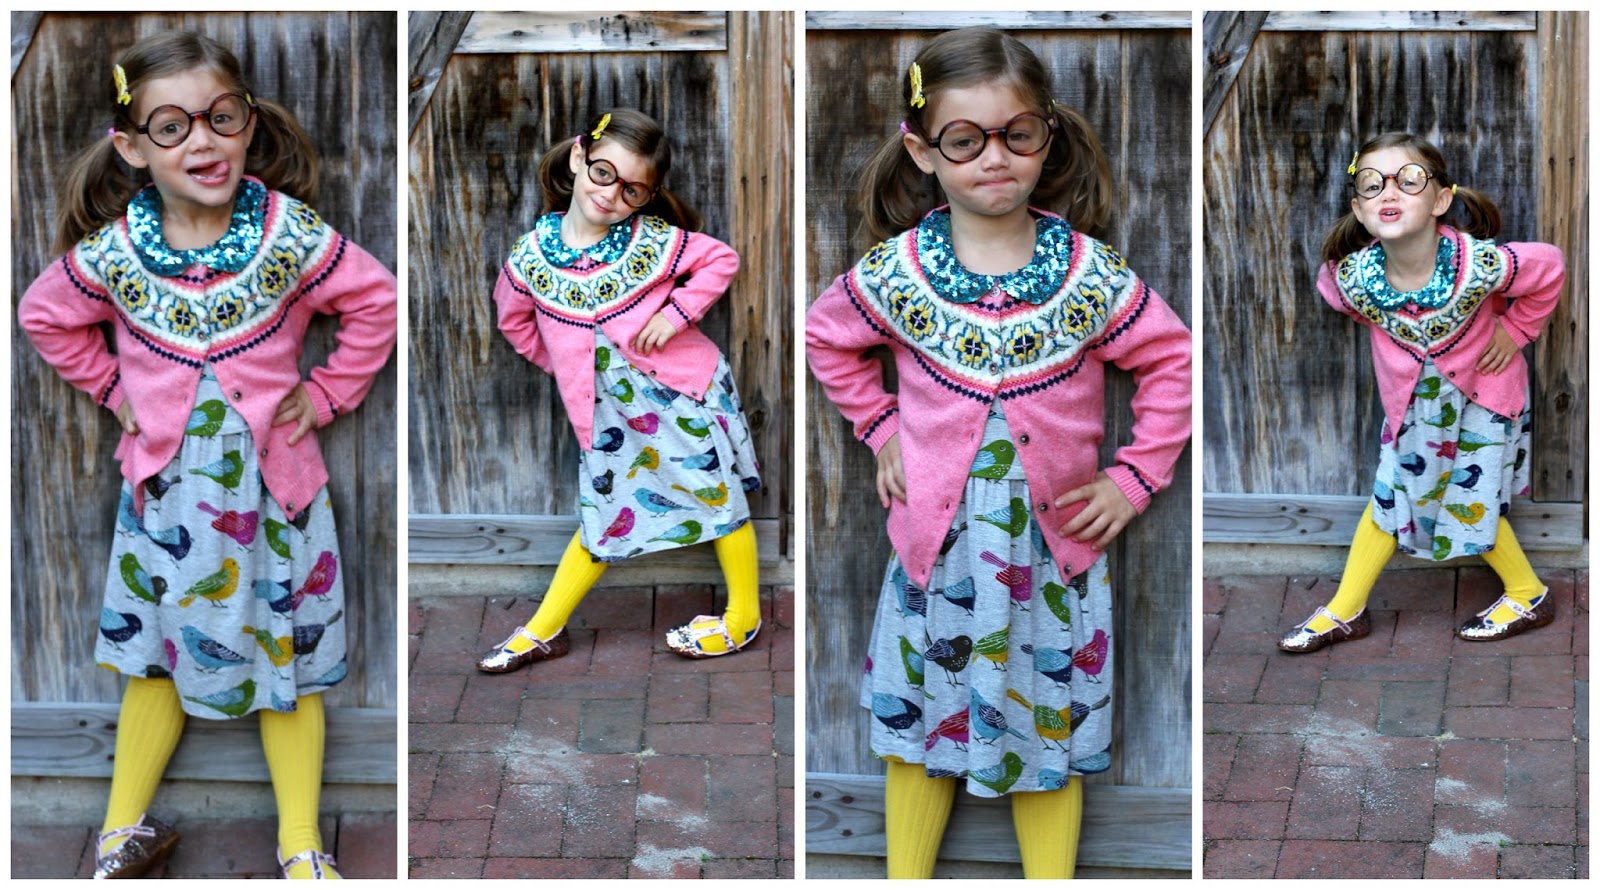 Our Favorite Mix & Match School Styles for & Girls - The Chirping Moms